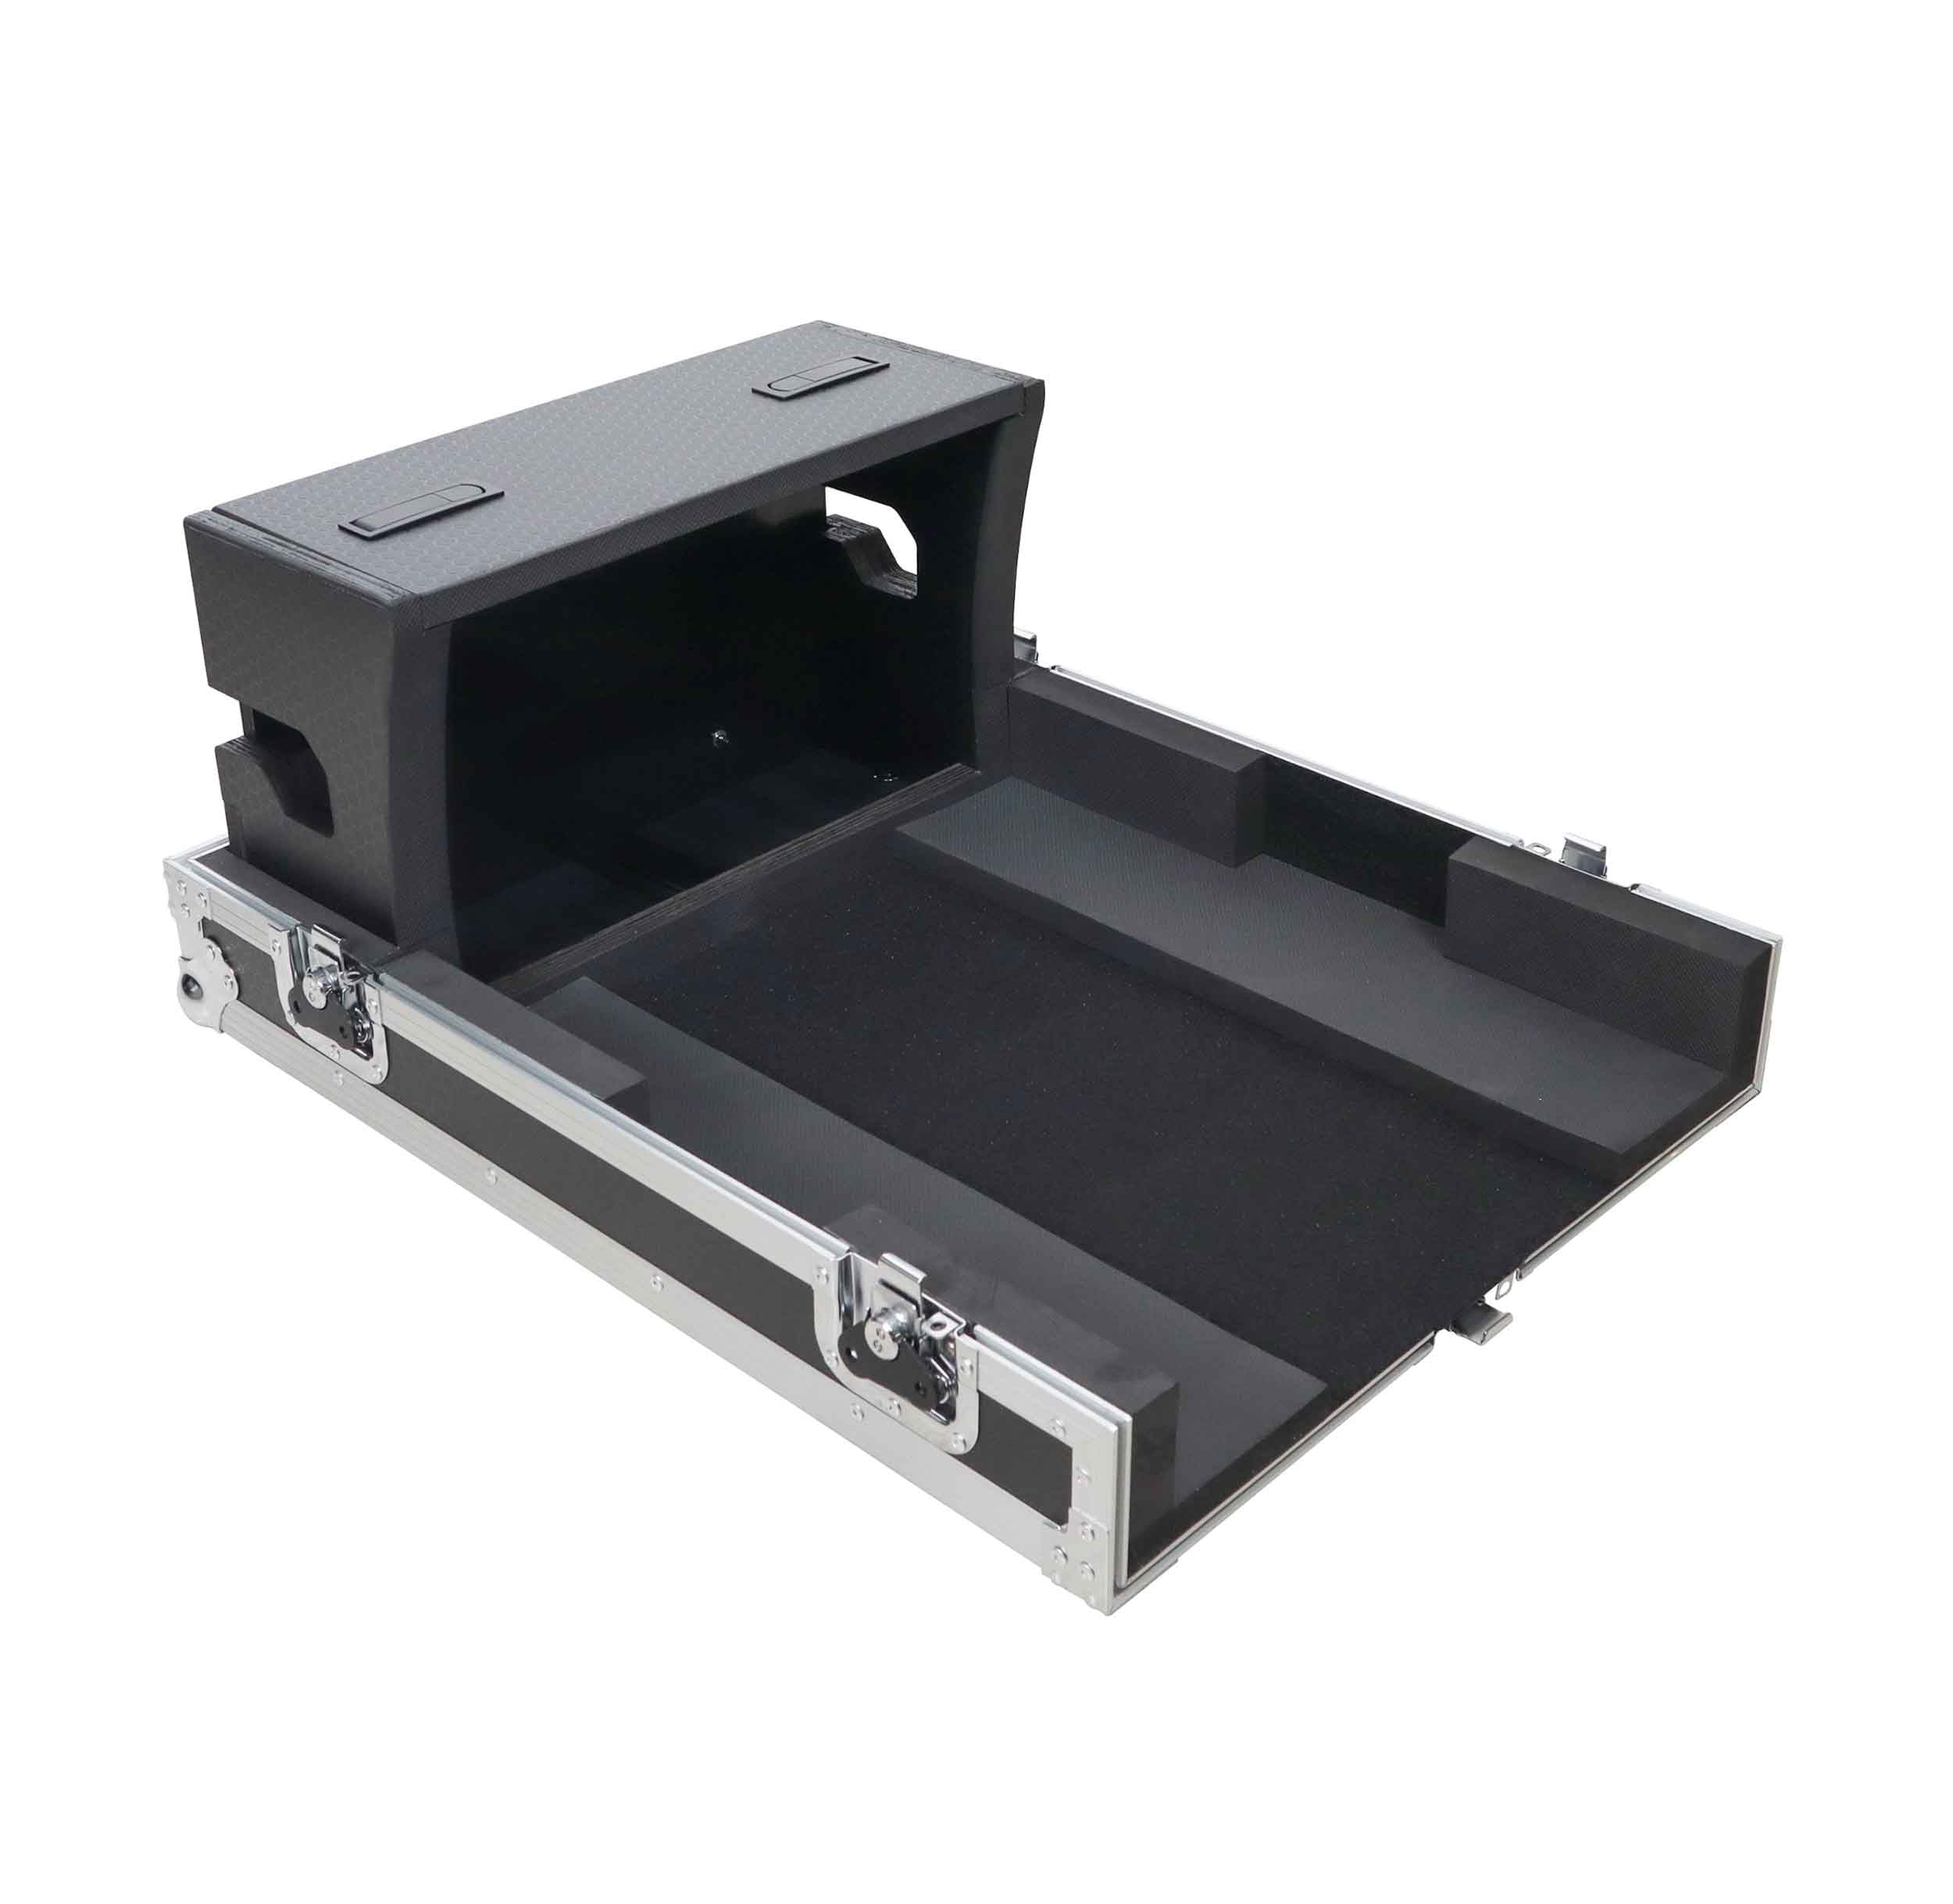 ProX XS-YDM7COMPACTDHW, ATA Digital Audio Mixer Flight Case for Yamaha DM7 Compact Console with Caster Wheels by ProX Cases